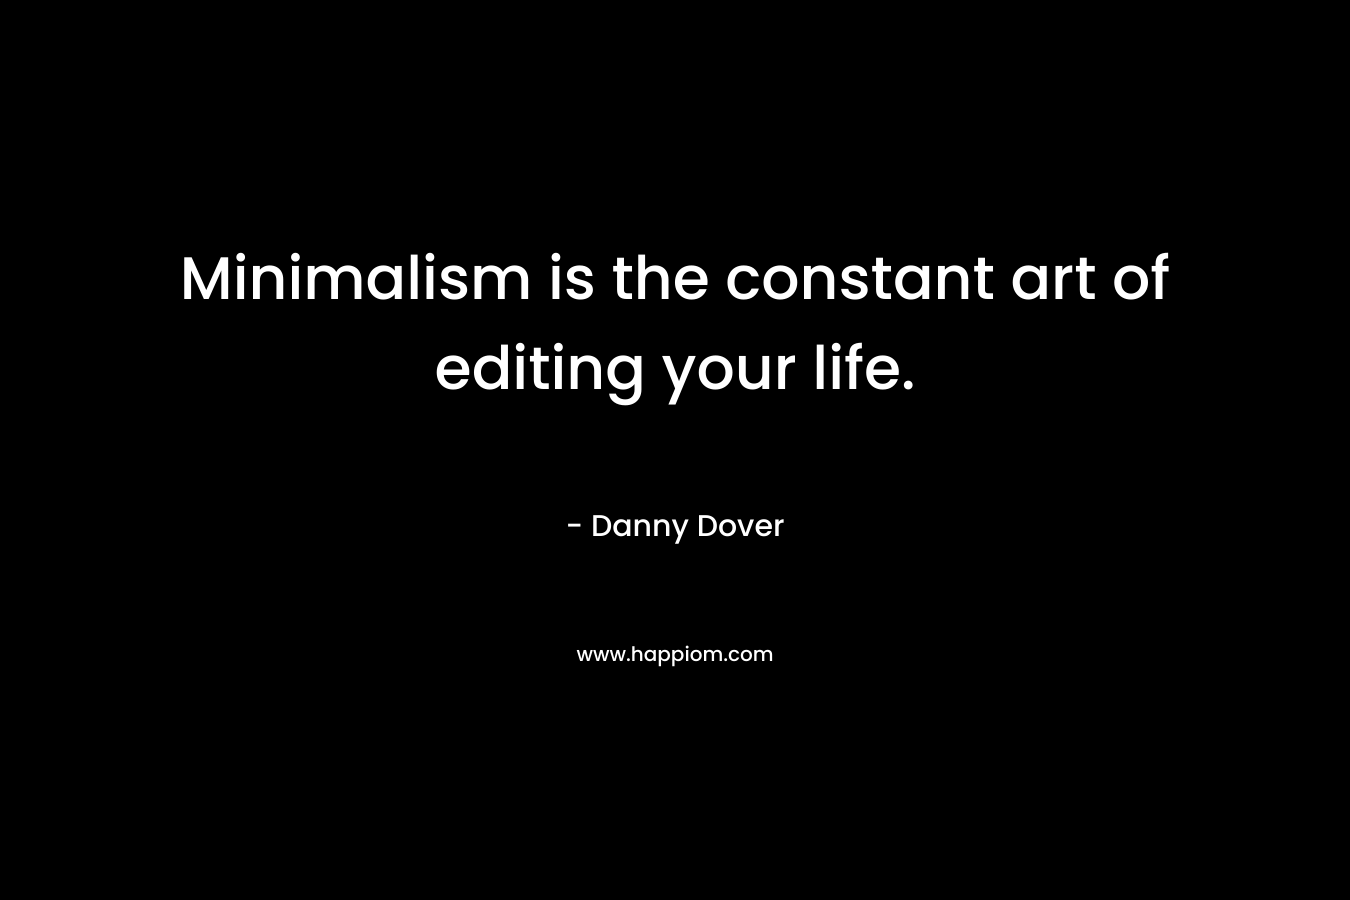 Minimalism is the constant art of editing your life. – Danny Dover